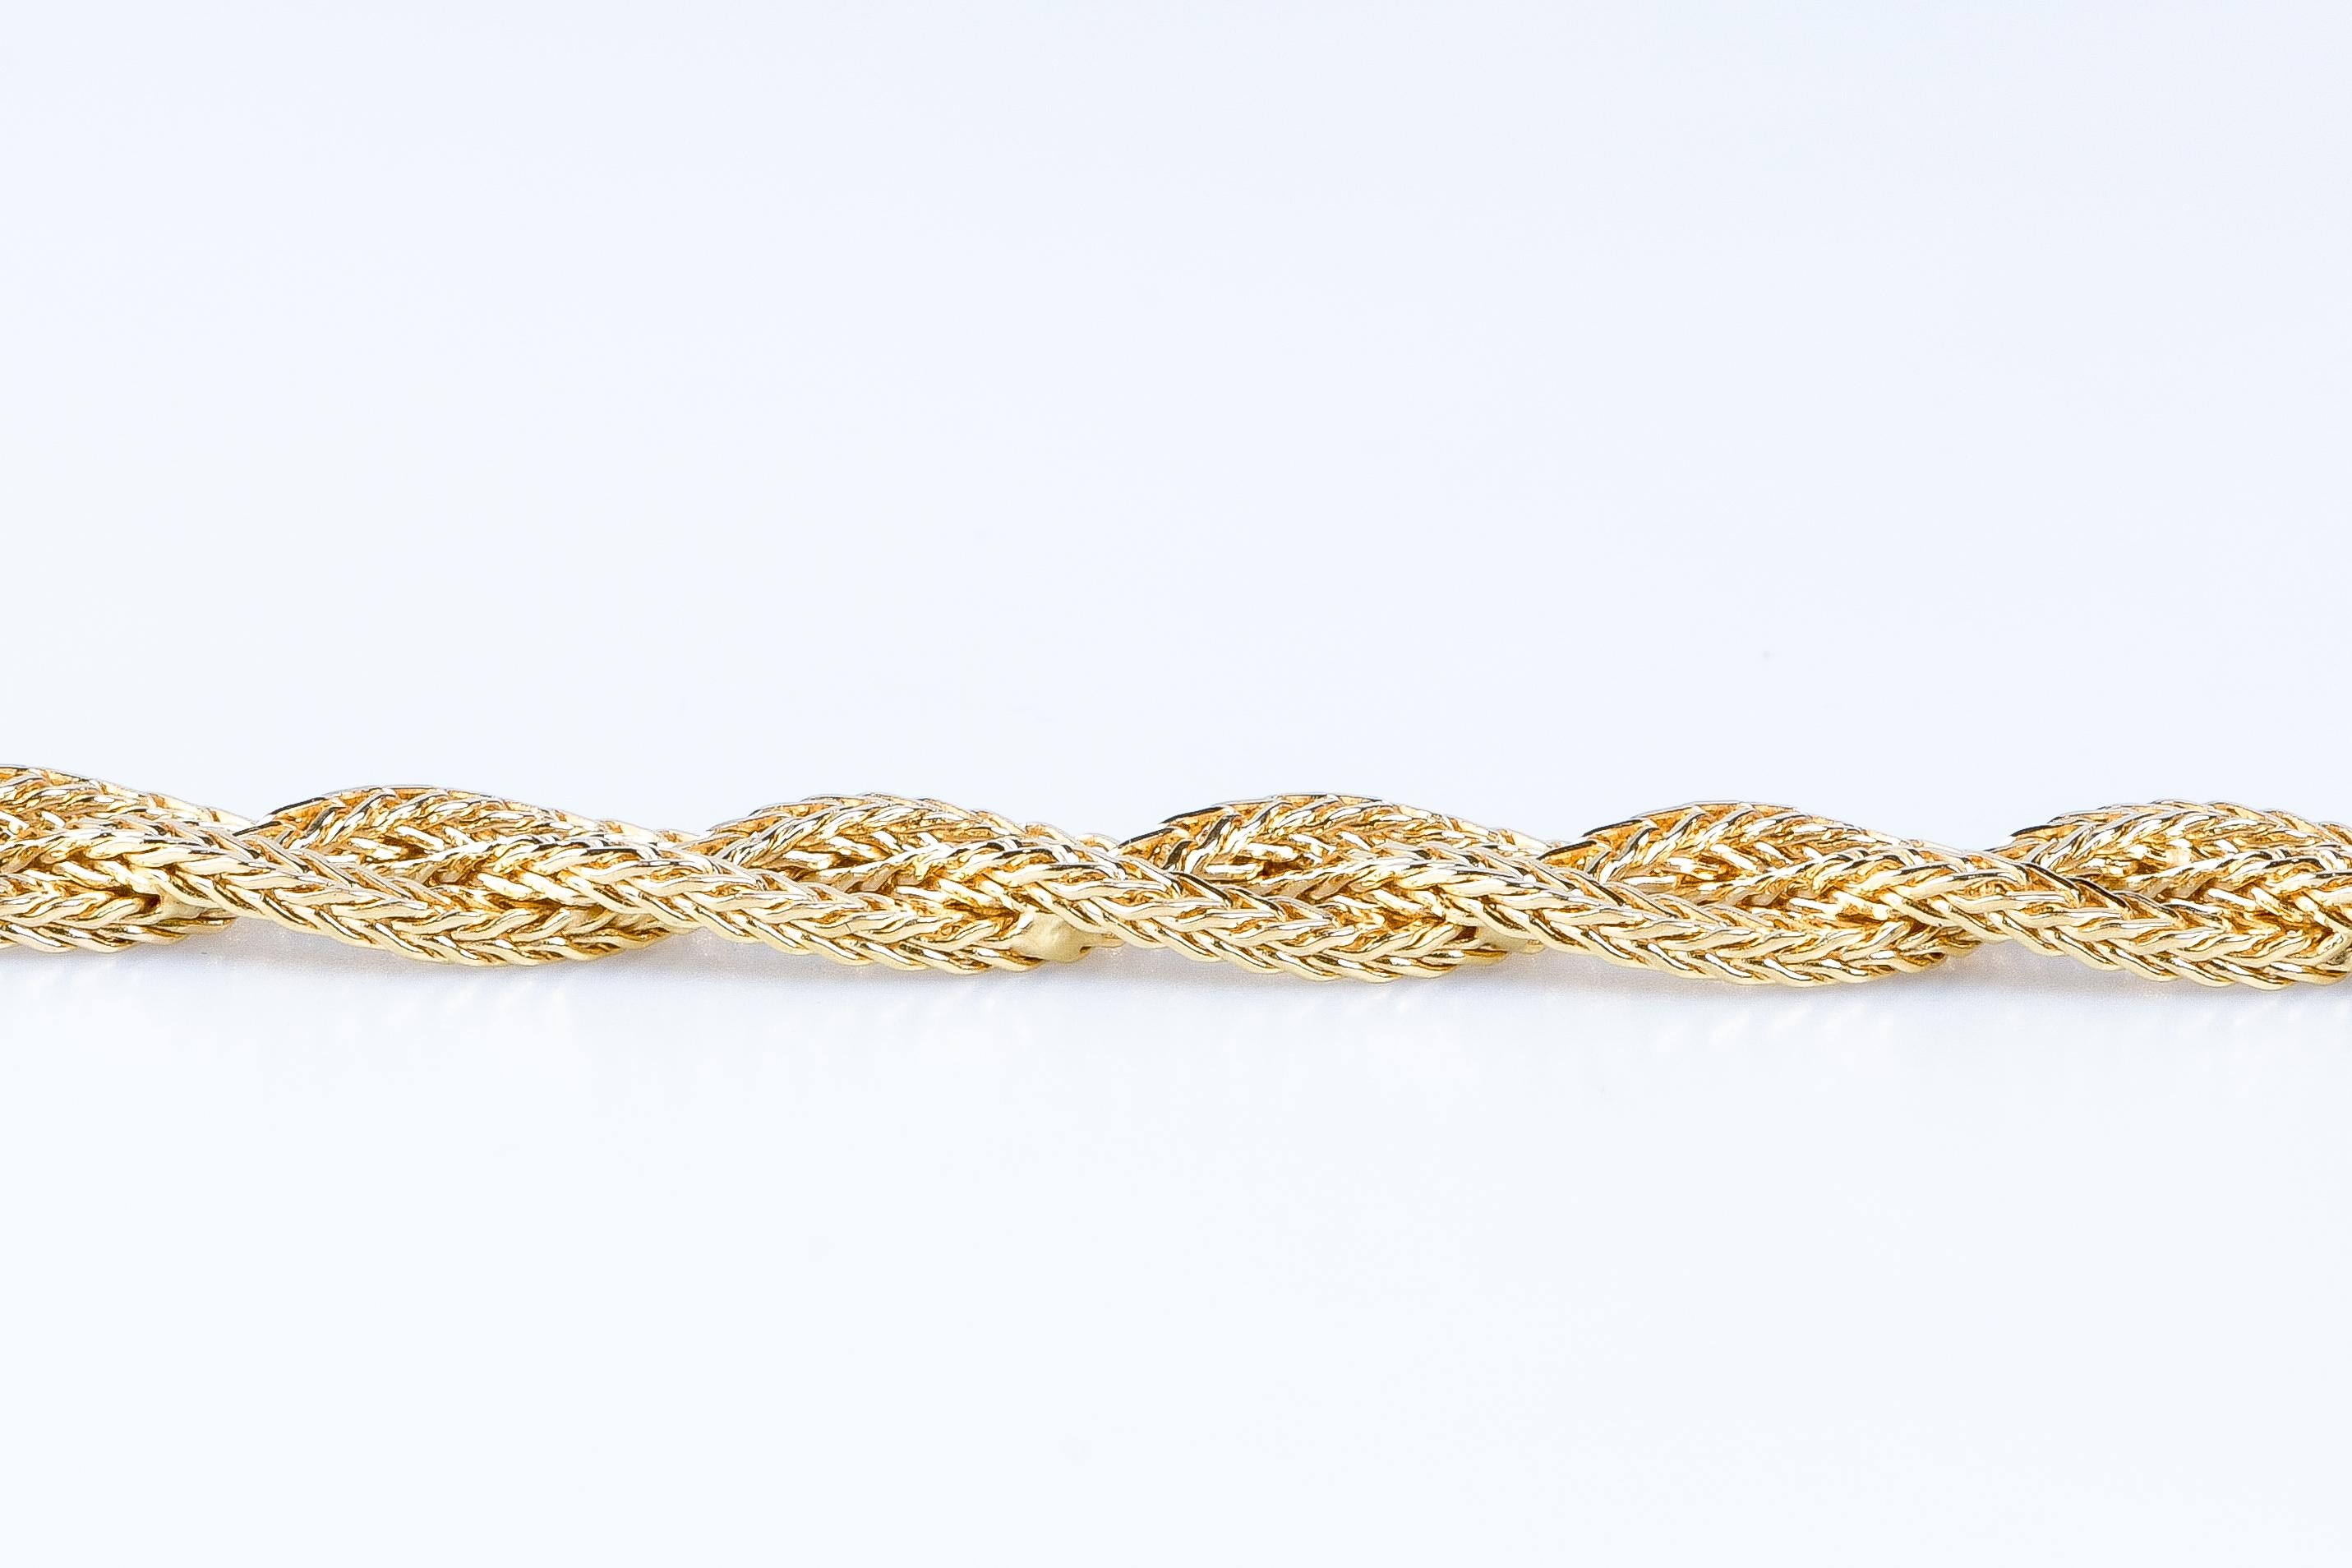 18 carat yellow gold braid bracelet. 

Weight: 22.60 gr. 

Dimensions : 18 x 0.94 cm

Jewel delivered in a luxurious box. 

Condition : Like new

18 carat gold eagle head hallmark on the jewel. 

Secure and express delivery within 24 to 48 hours. 